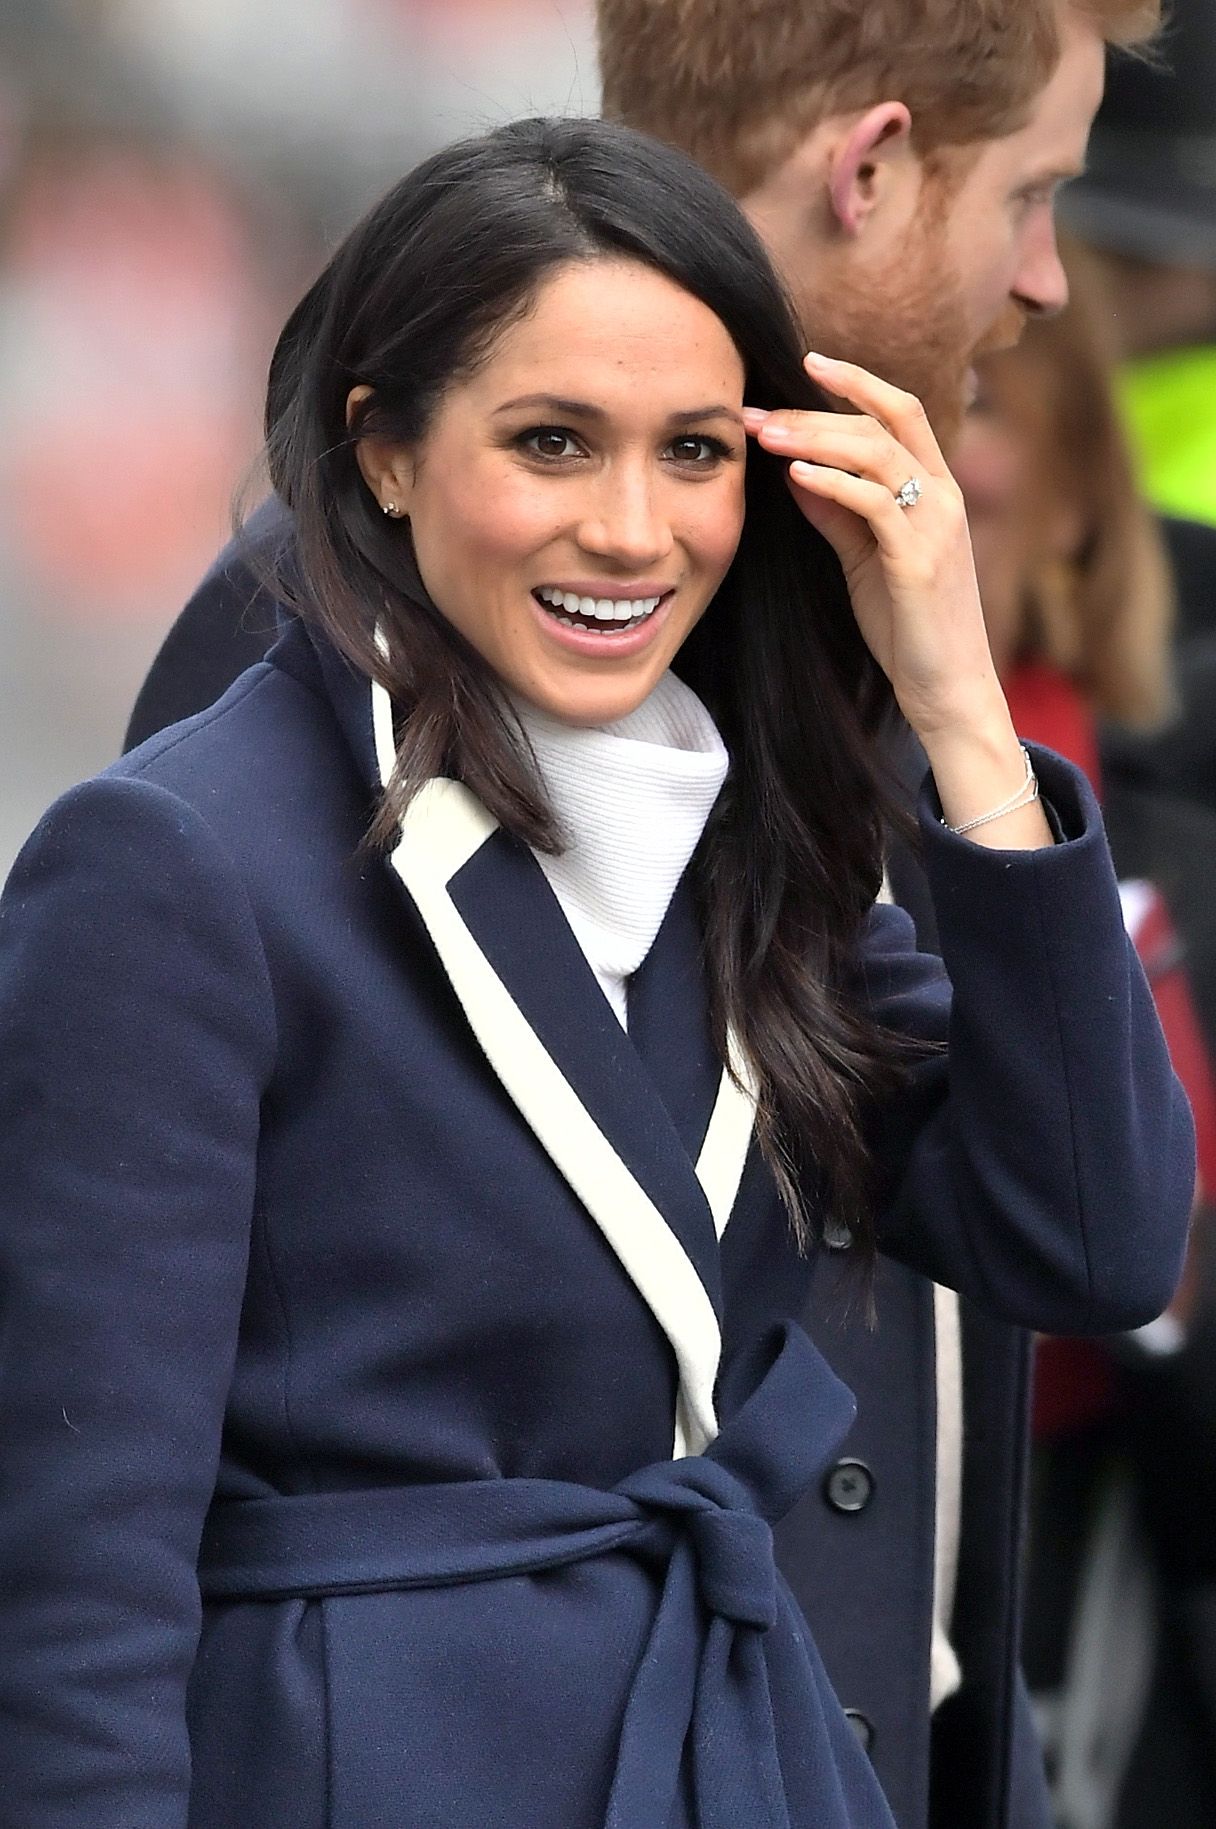 Prince Harry May Not Wear a Ring When He Marries Meghan Markle